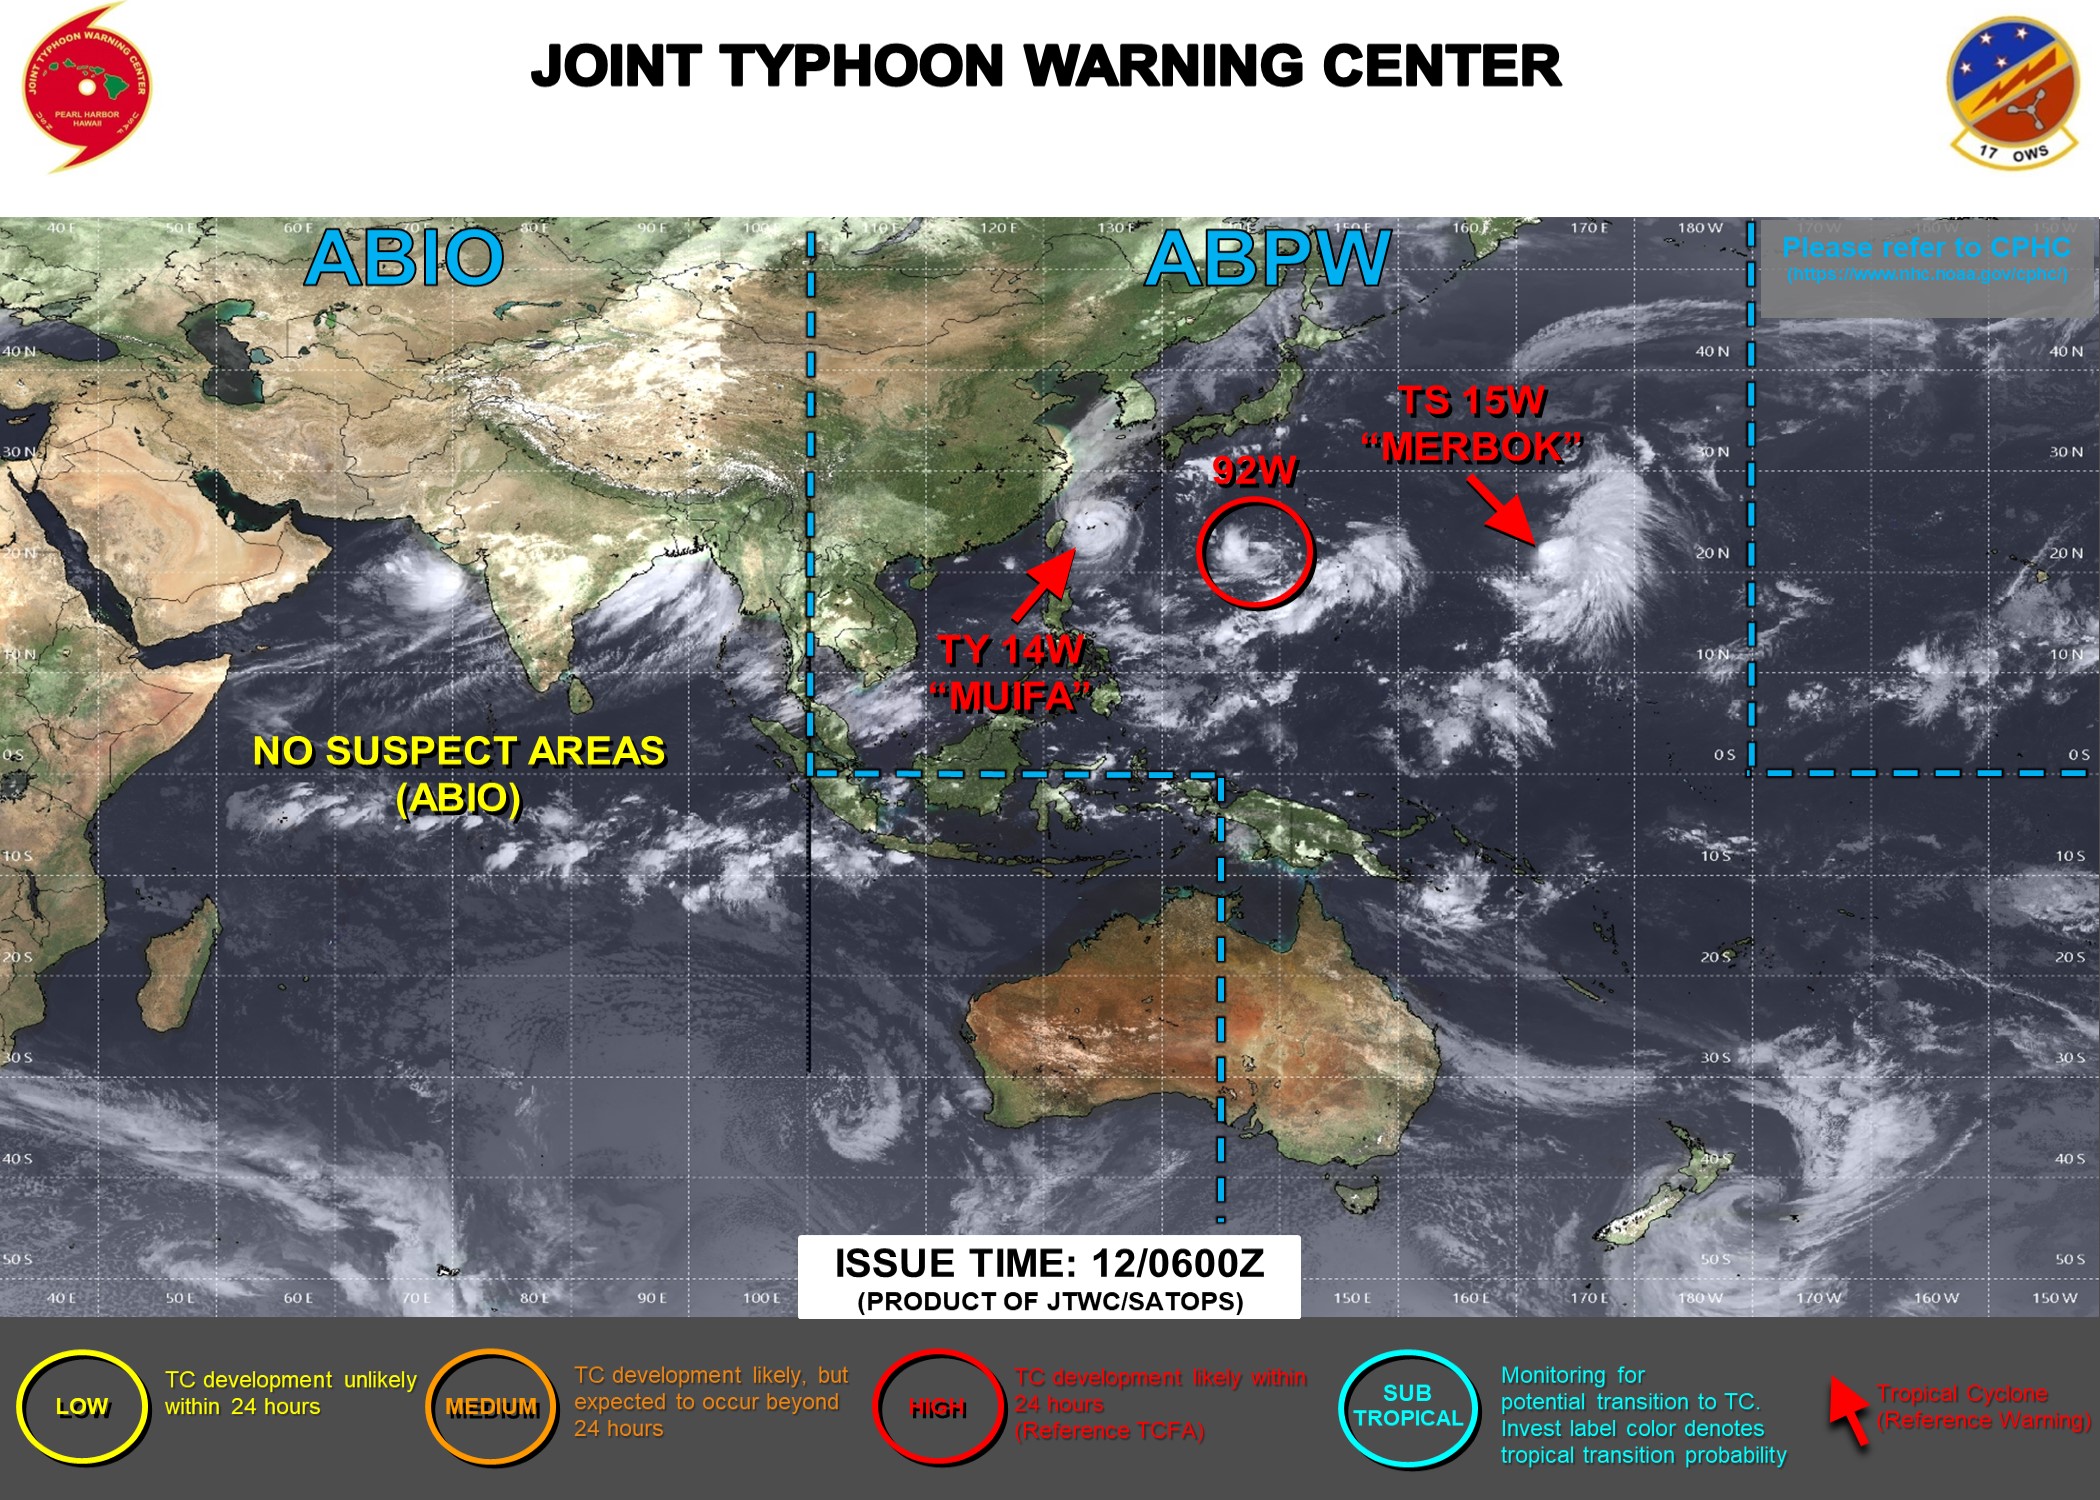 JTWC IS ISSUING 6HOURLY WARNINGS AND 3HOURLY SATELLITE BULLETINS ON 14W(MUIFA) AND 15W(MERBOK). 3HOURLY SATELLITE BULLETINS ARE ISSUED ON INVEST 92W.